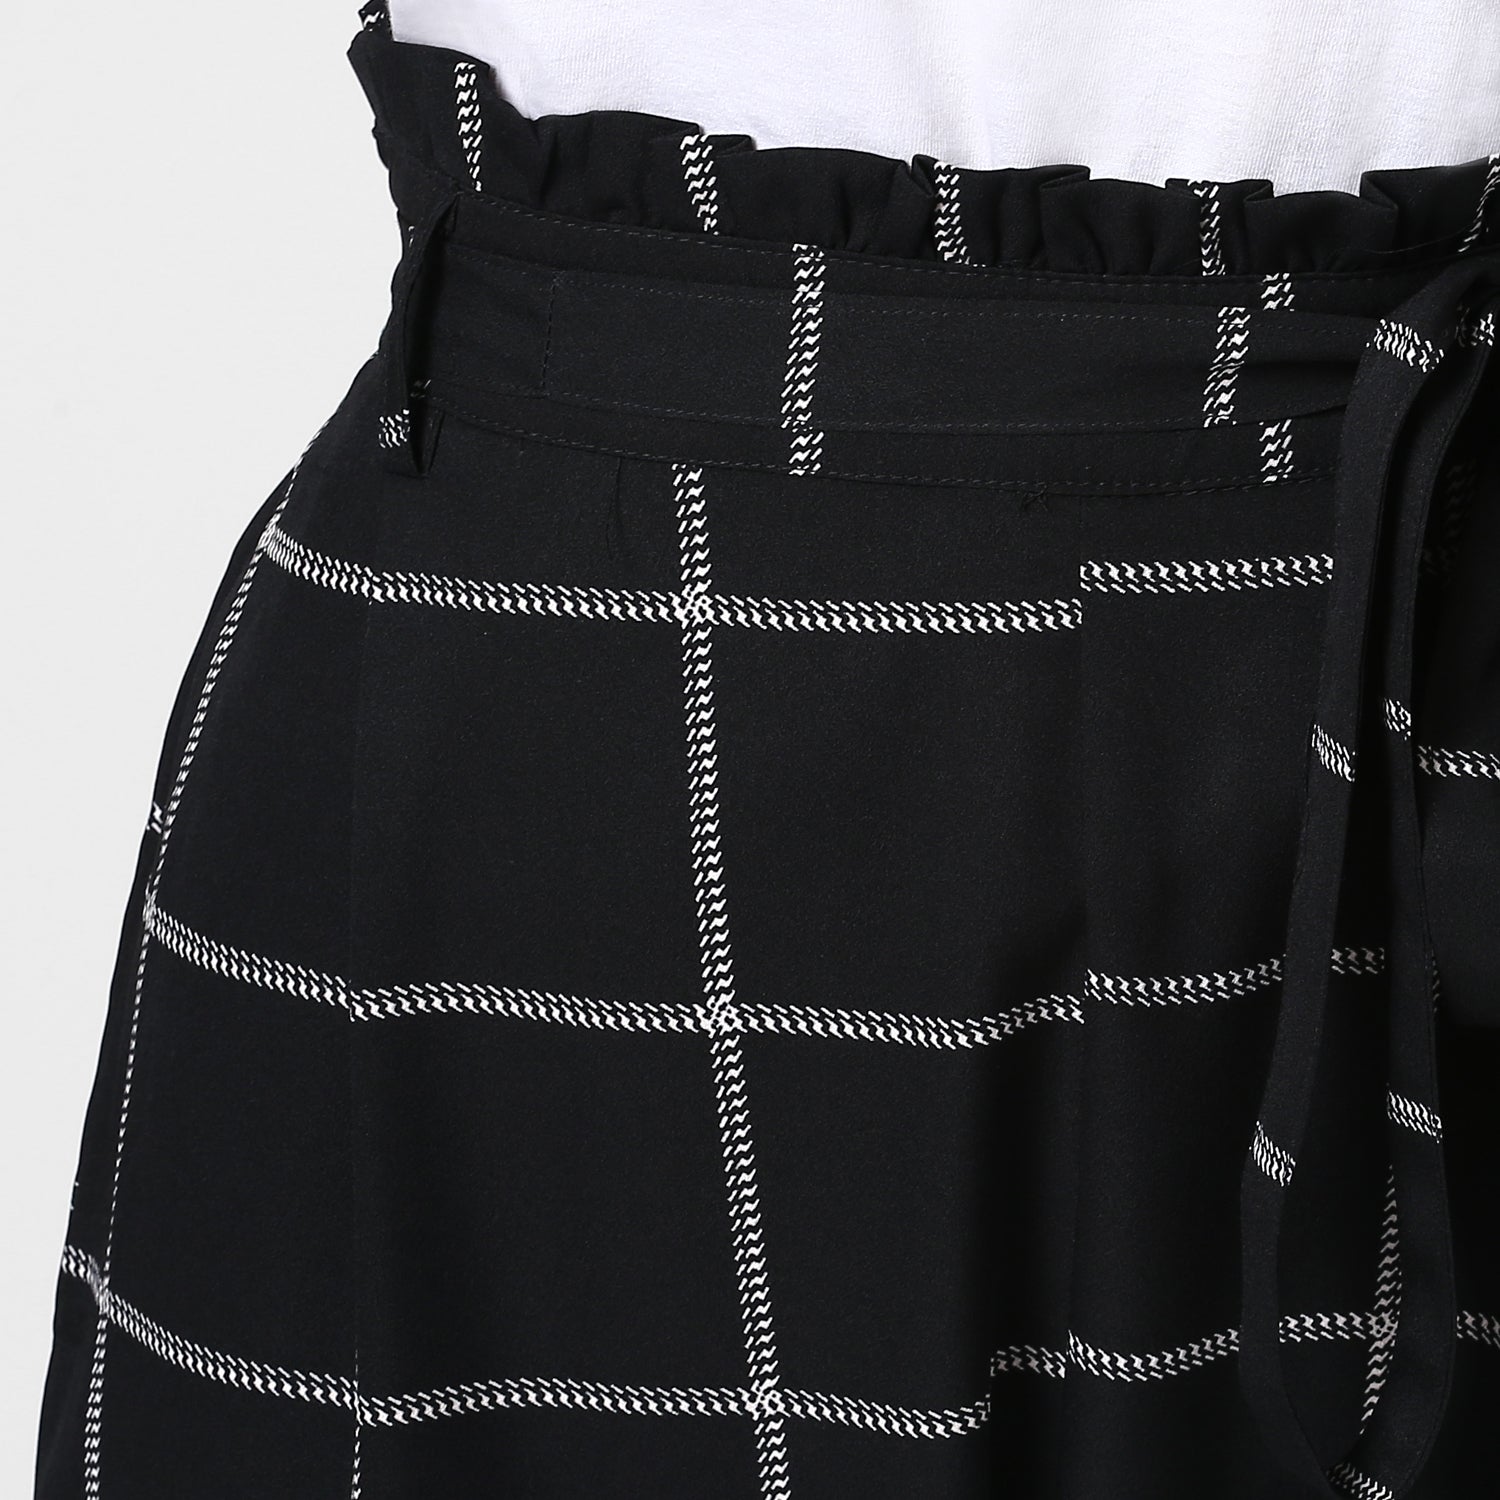 Women's Black and White Check Paperbag Pants with elasticated waistband - StyleStone